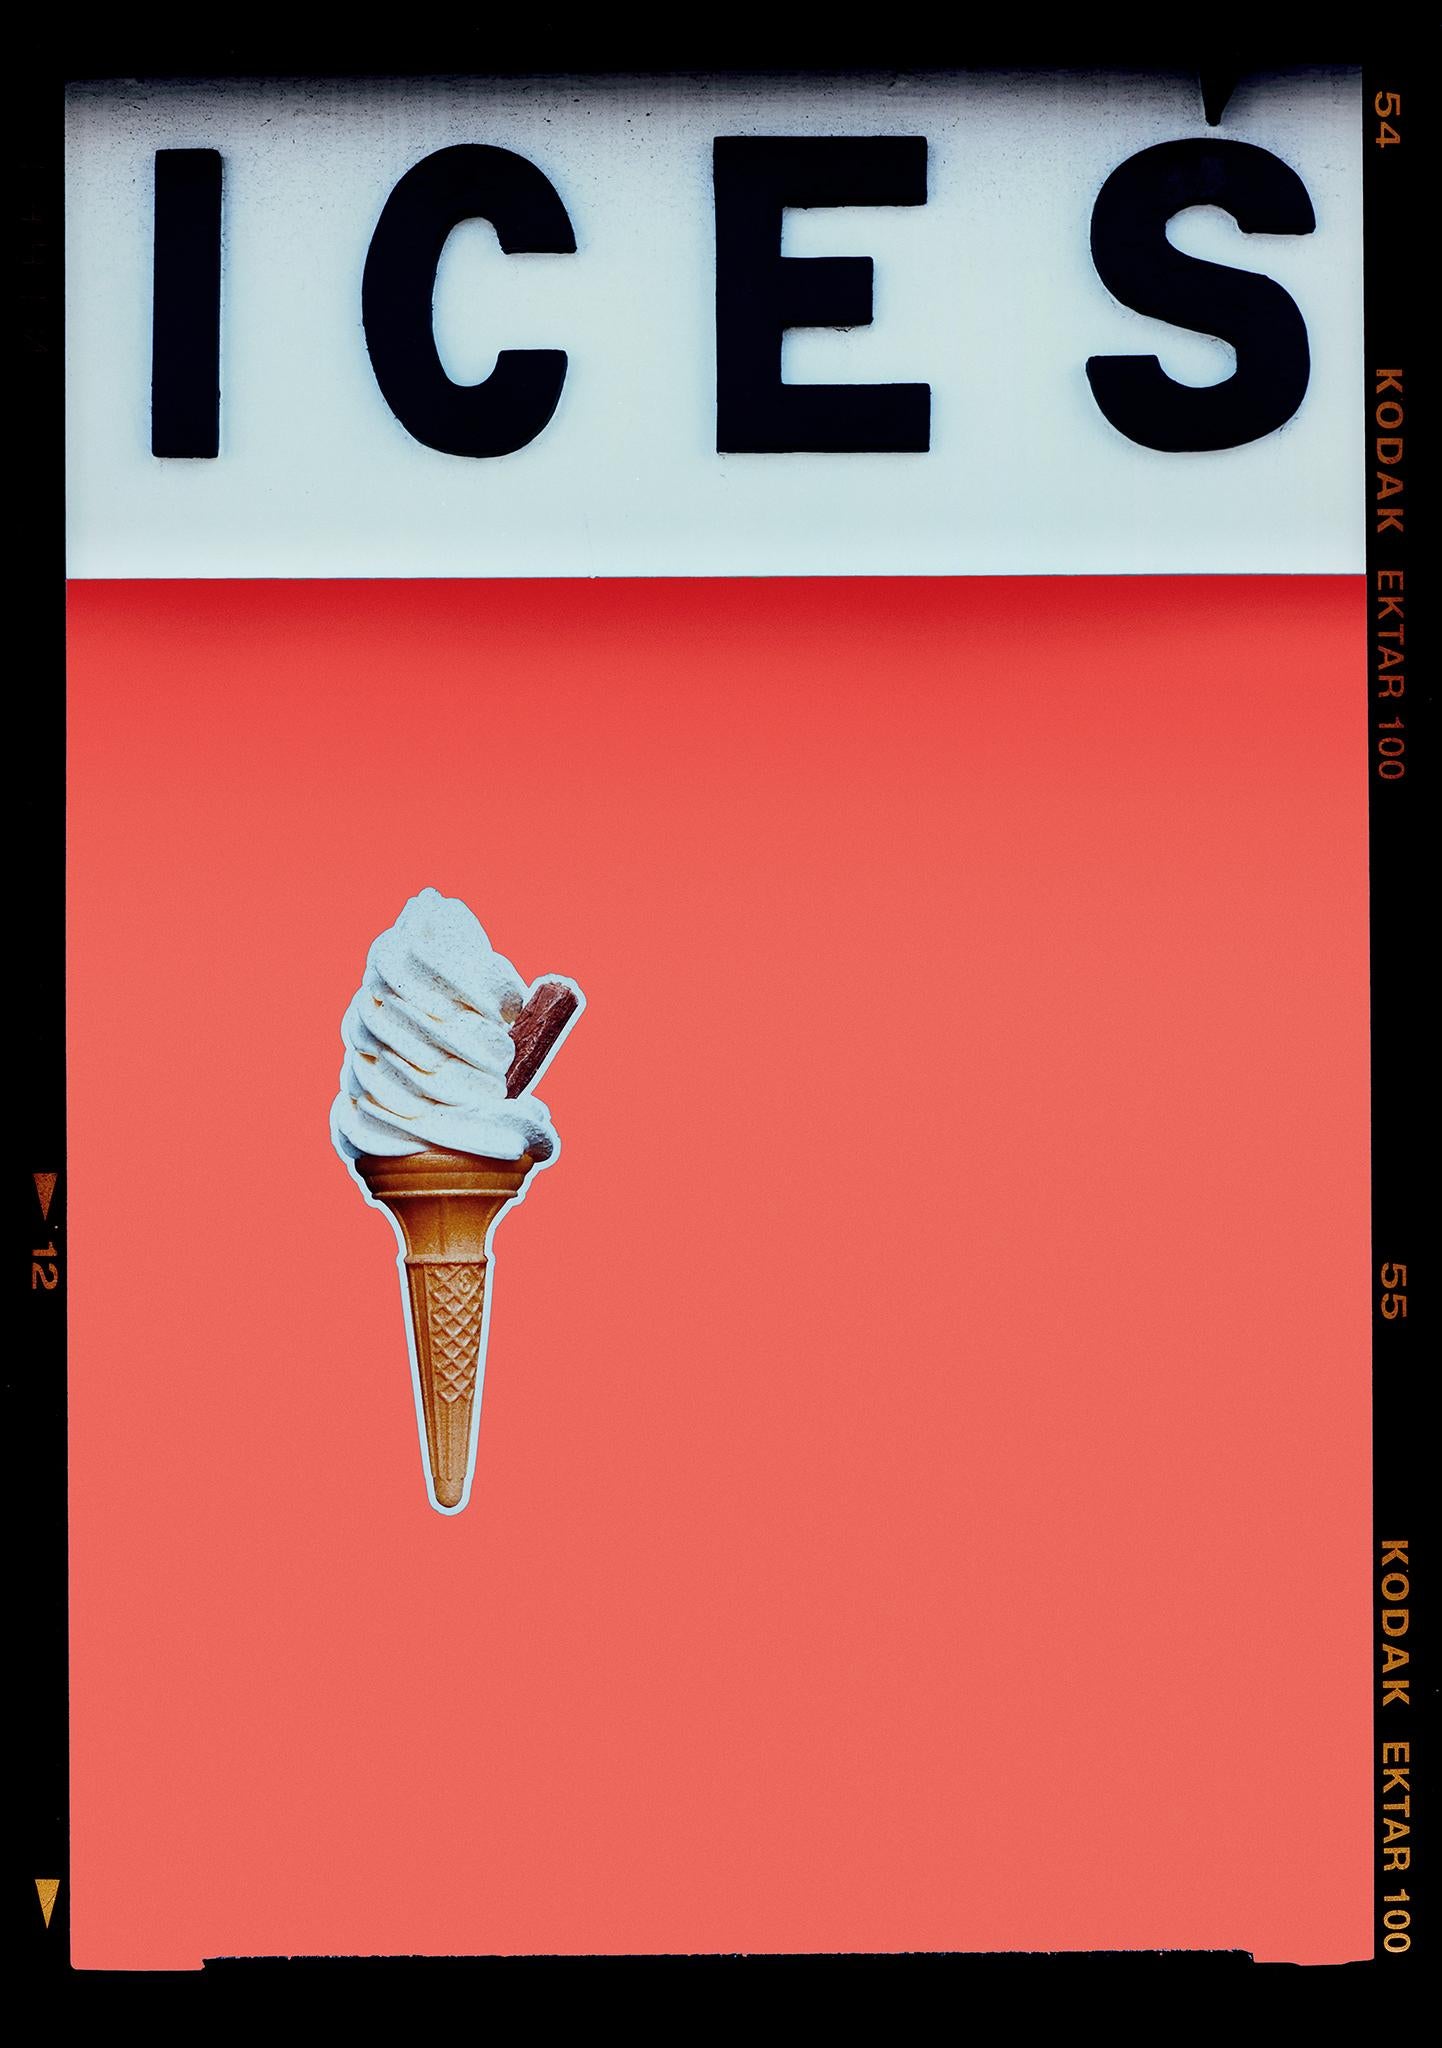 Richard Heeps Color Photograph - Ices (Melondrama), Bexhill-on-Sea - British seaside color photography